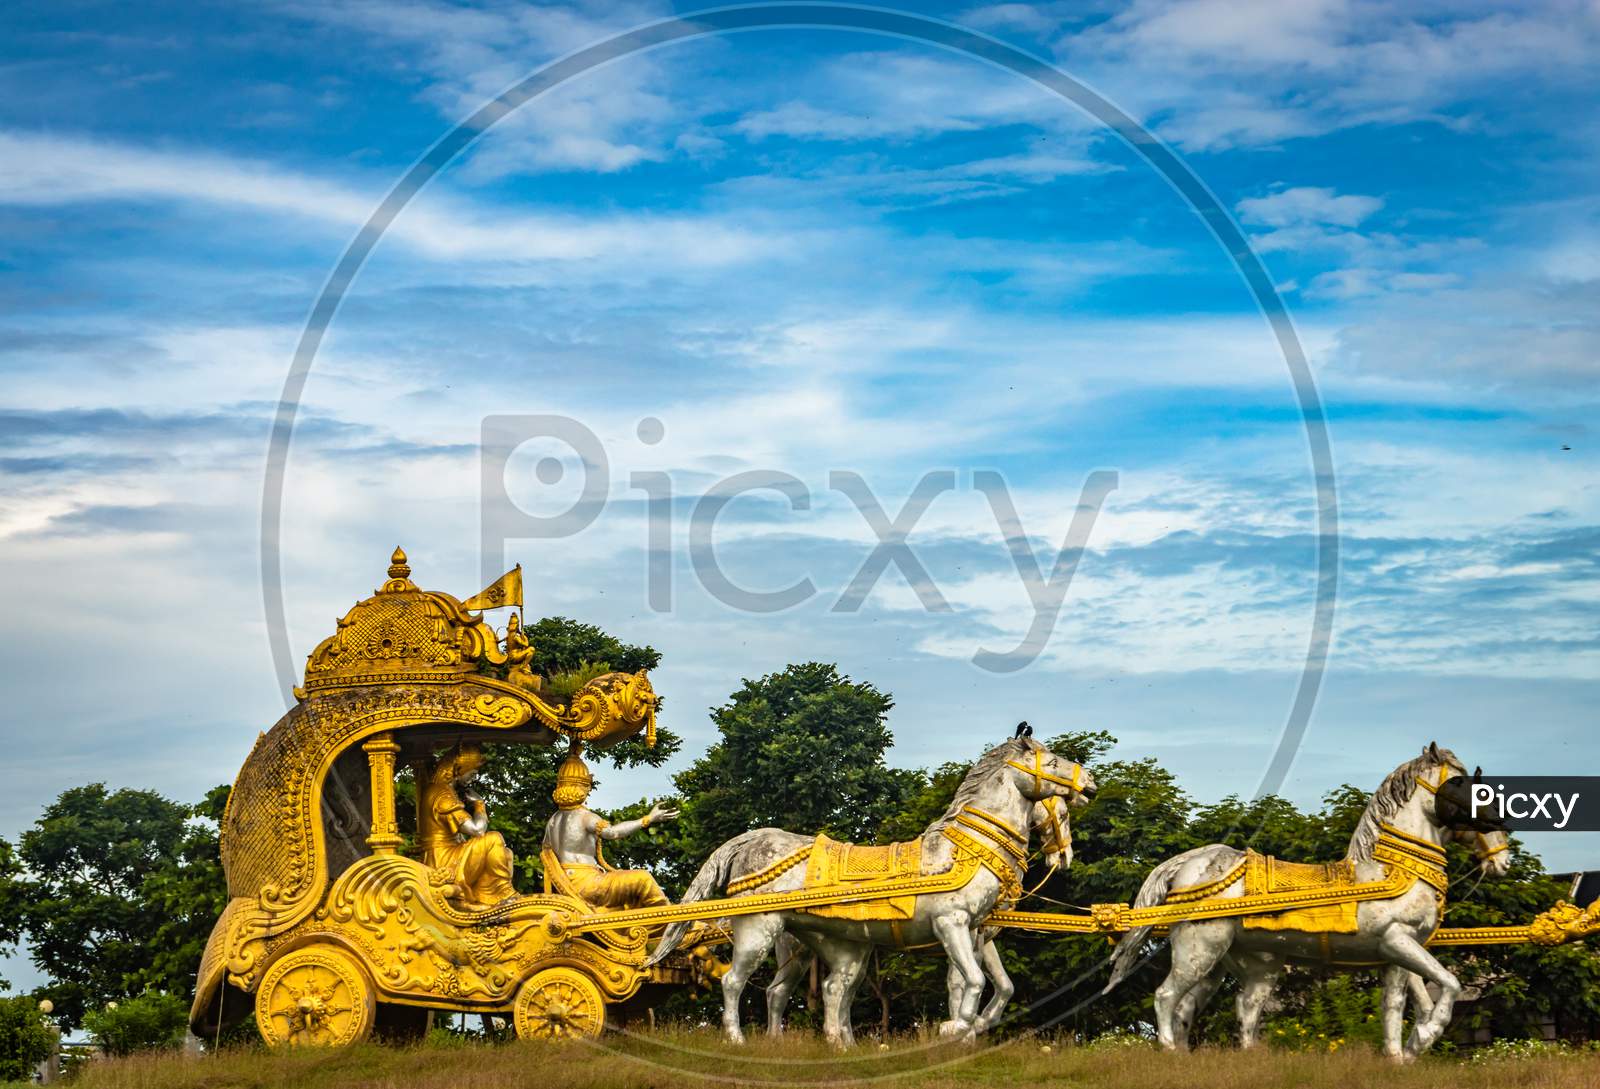 Holly Arjuna Chariot Of Mahabharata In Golden Color With Amazing Sky Background